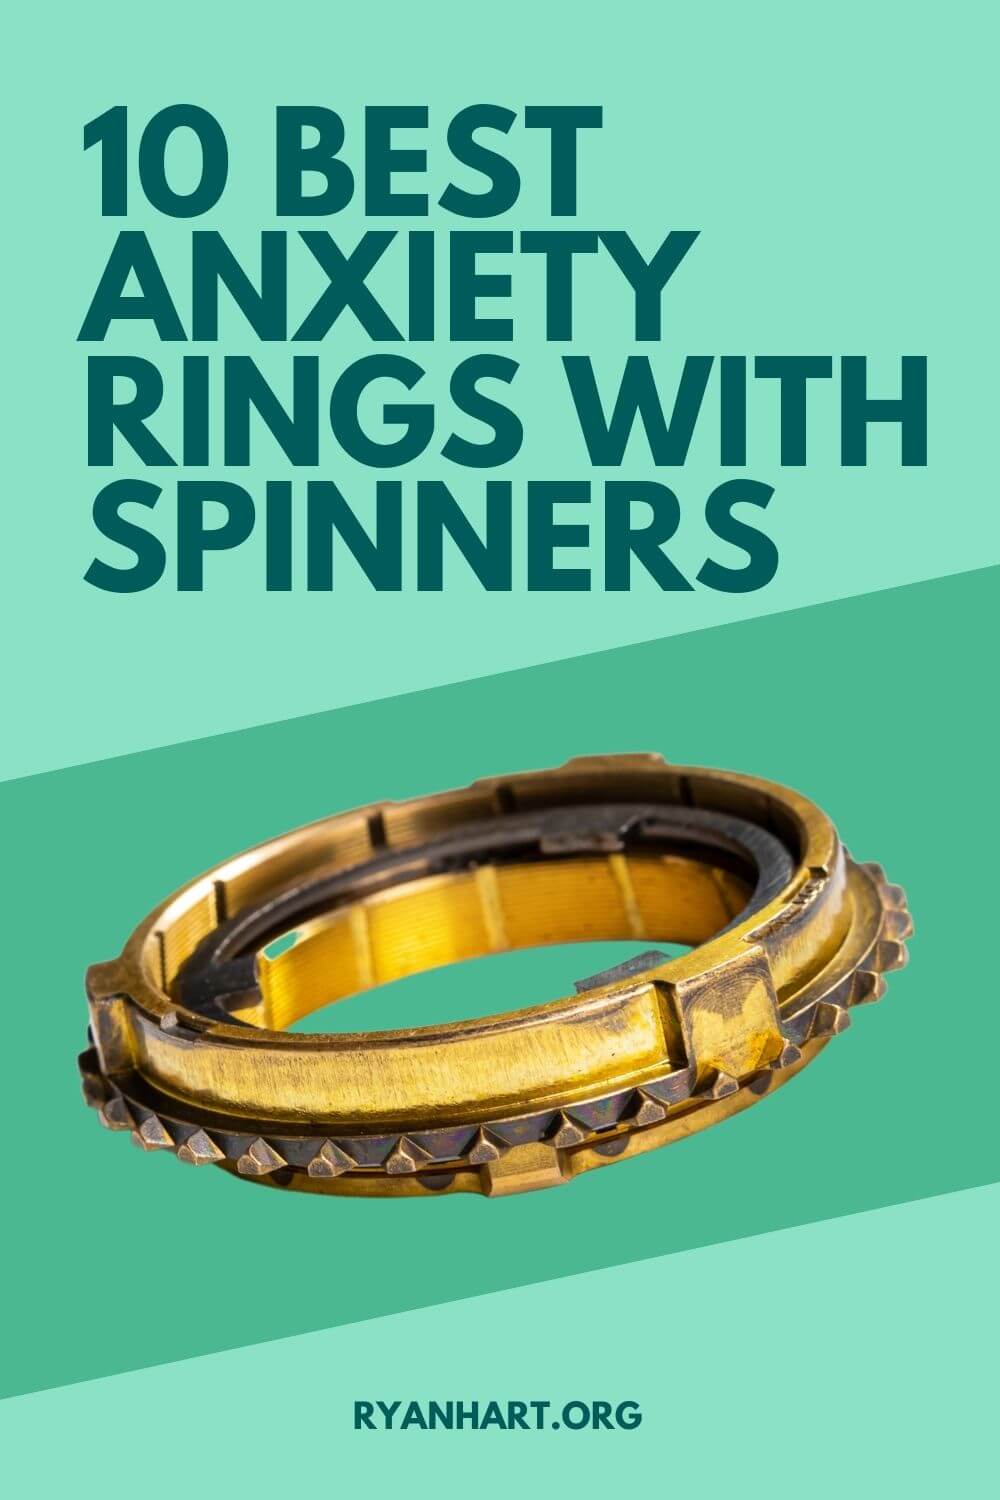  Person wearing a ring for anxiety relief